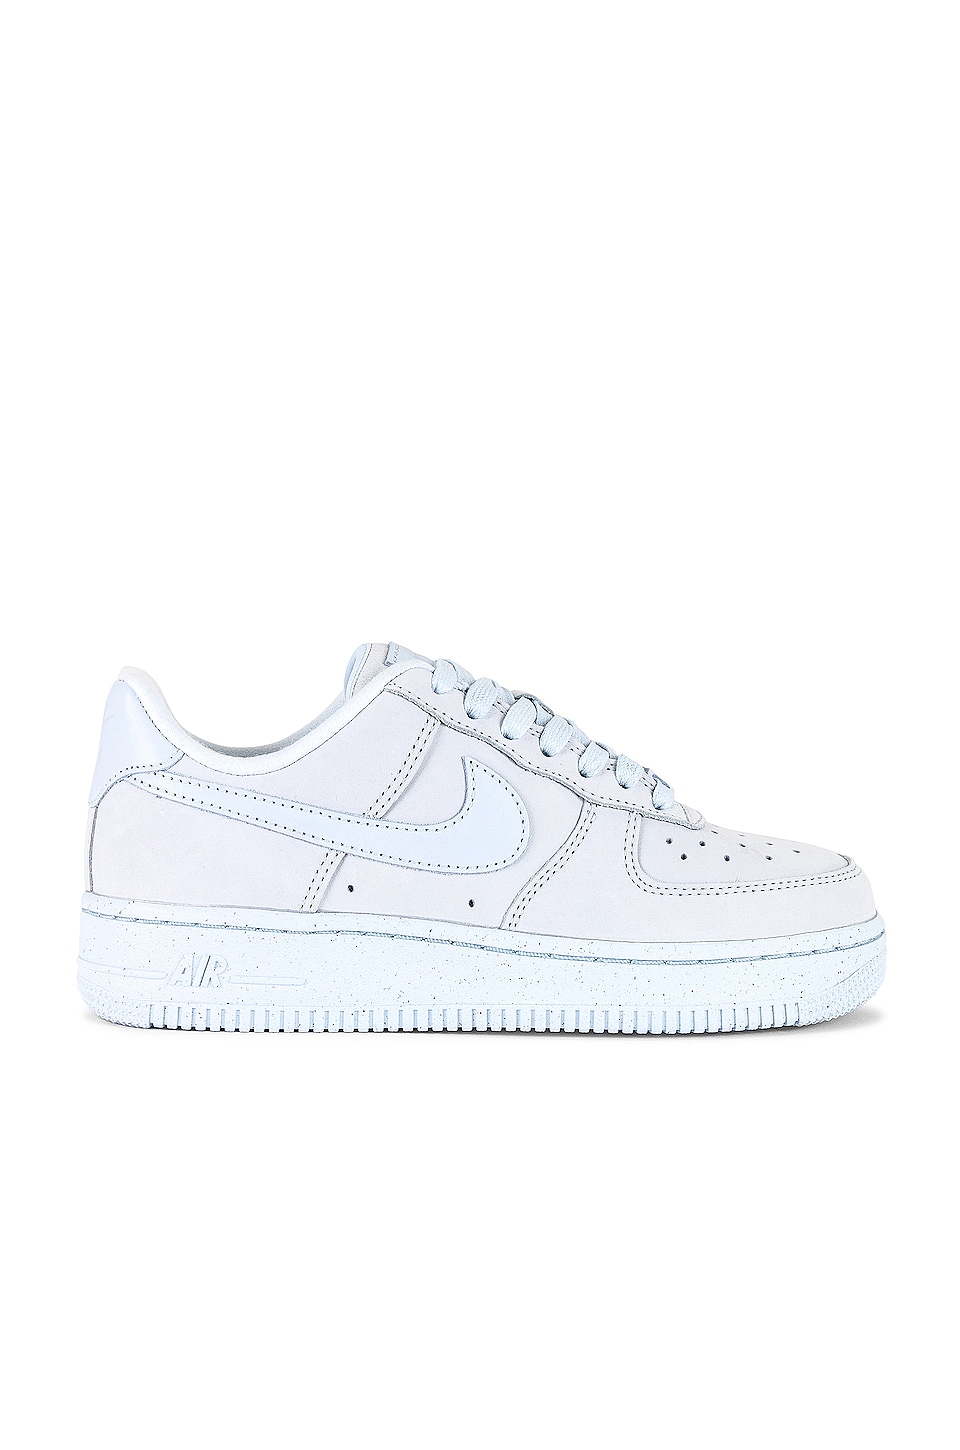 Nike Air Force 1 '07 Sneaker in Blue Tint | REVOLVE